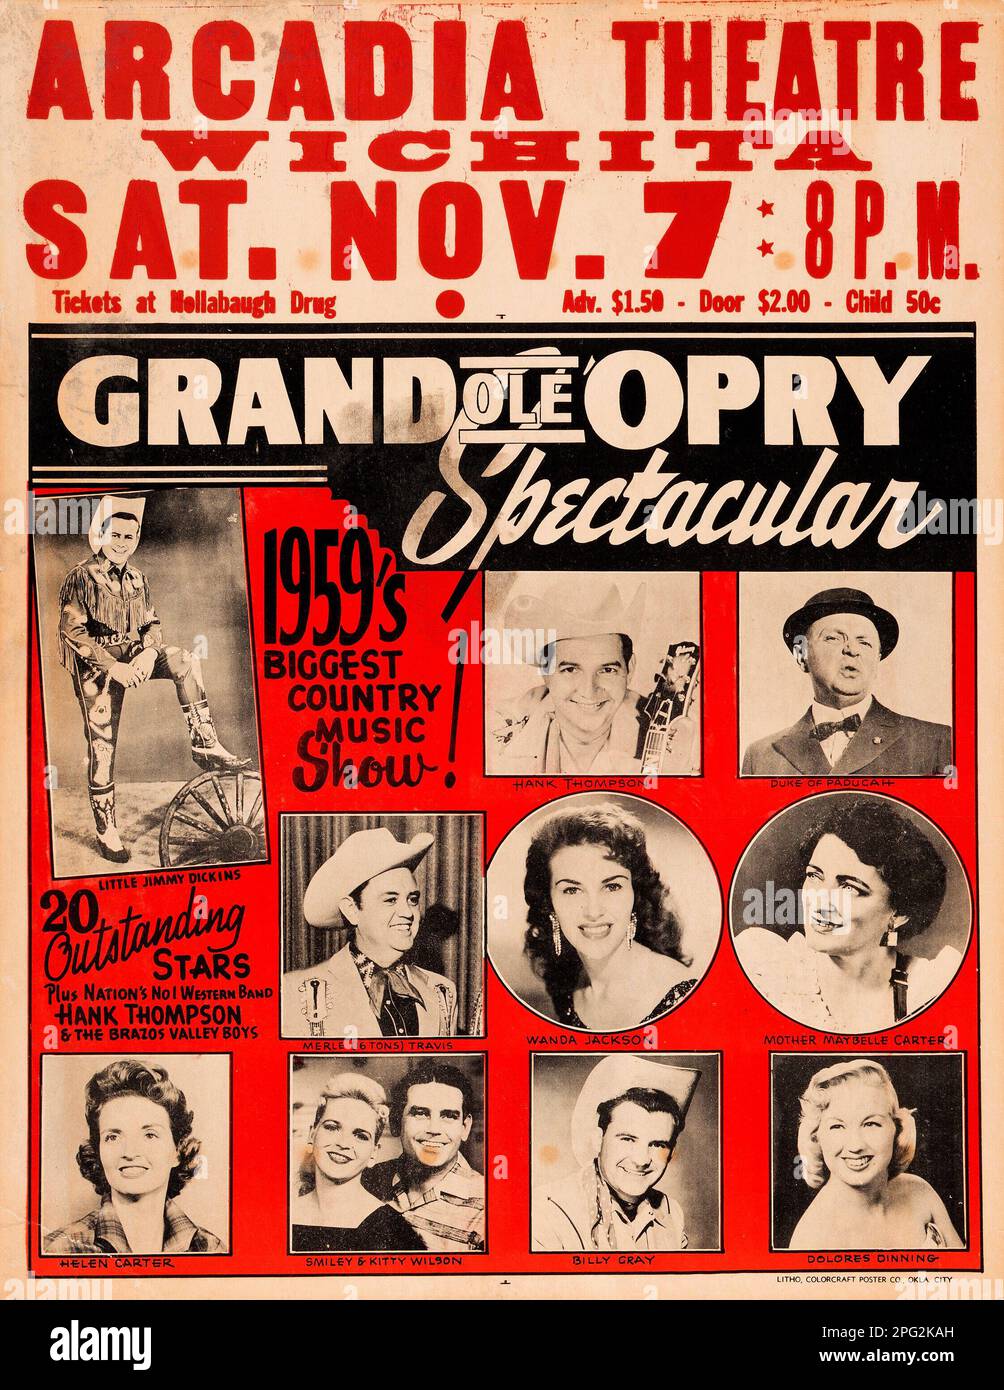 Grand ole Opry Spectacular - spettacolo di musica country - Wanda Jackson, Hank Thompson, Little Jimmy Dickins - 1959° Arcadia Theatre, Wichita, Kansas Concert Poster Foto Stock